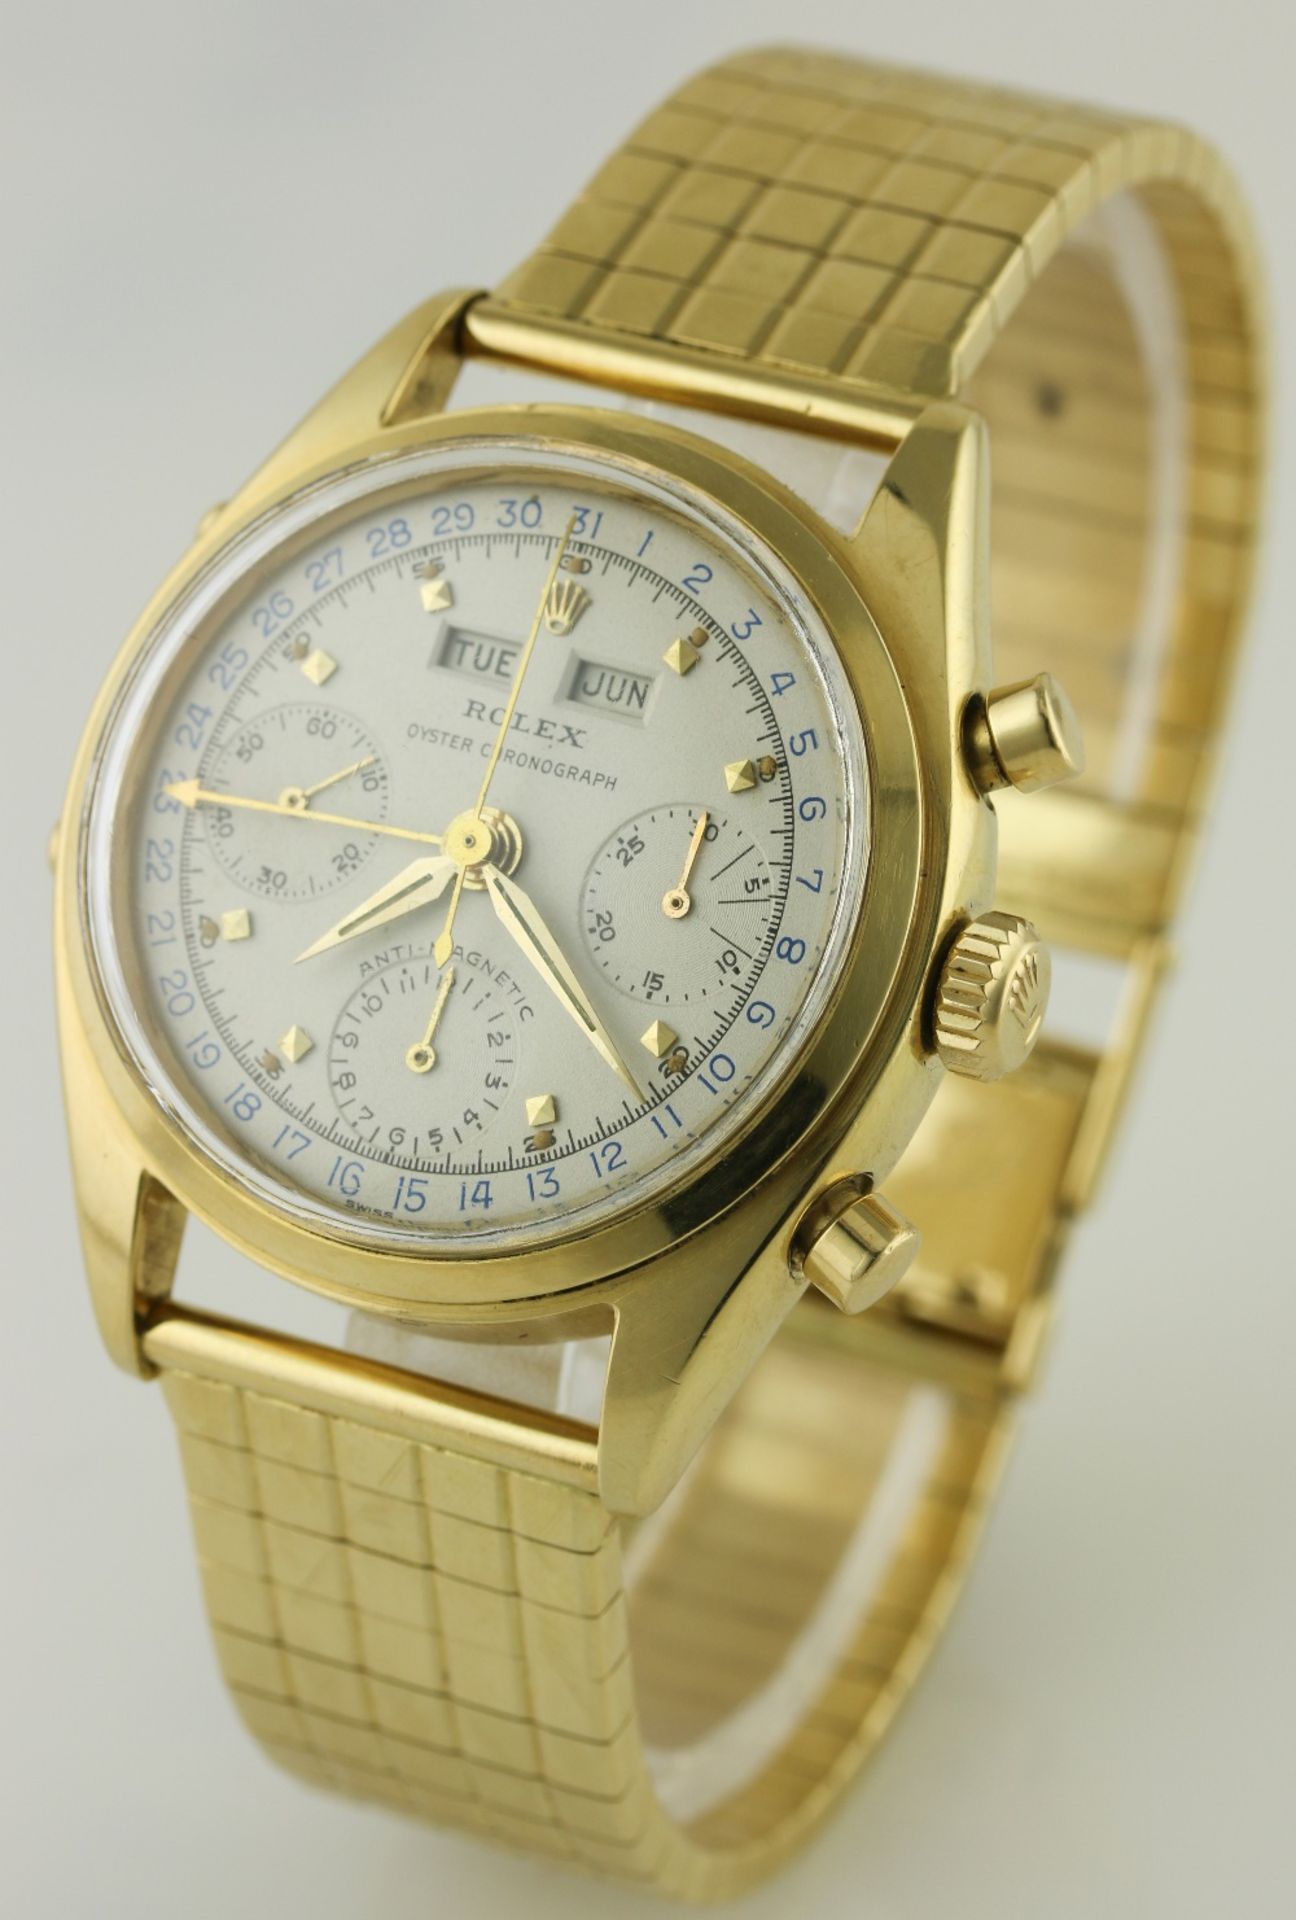 A FINE & RARE GENTLEMAN'S 18K SOLID GOLD ROLEX "JEAN-CLAUDE KILLY" OYSTER TRIPLE CALENDAR ANTI- - Image 7 of 13